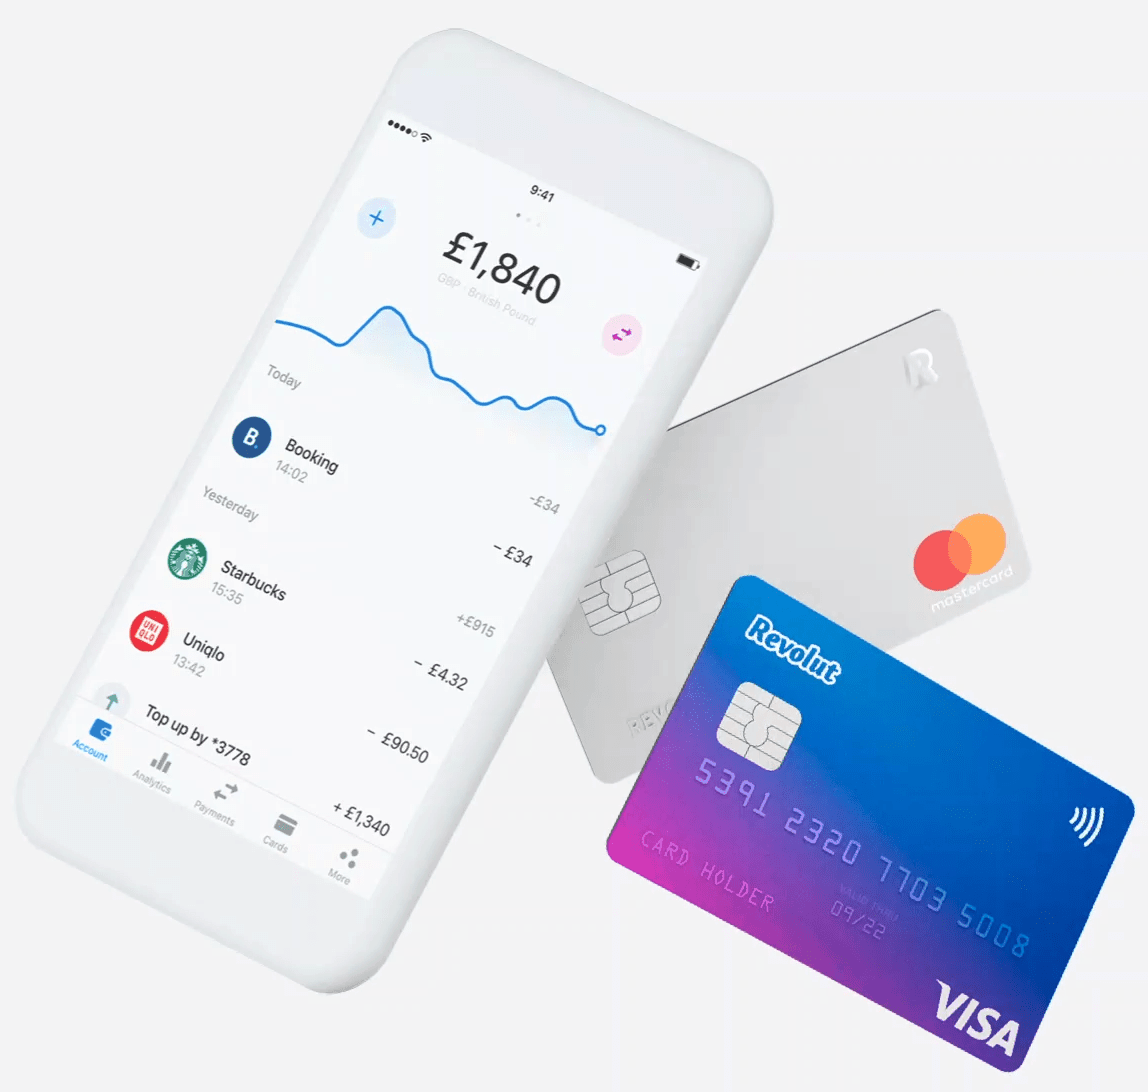 My experience with Revolut